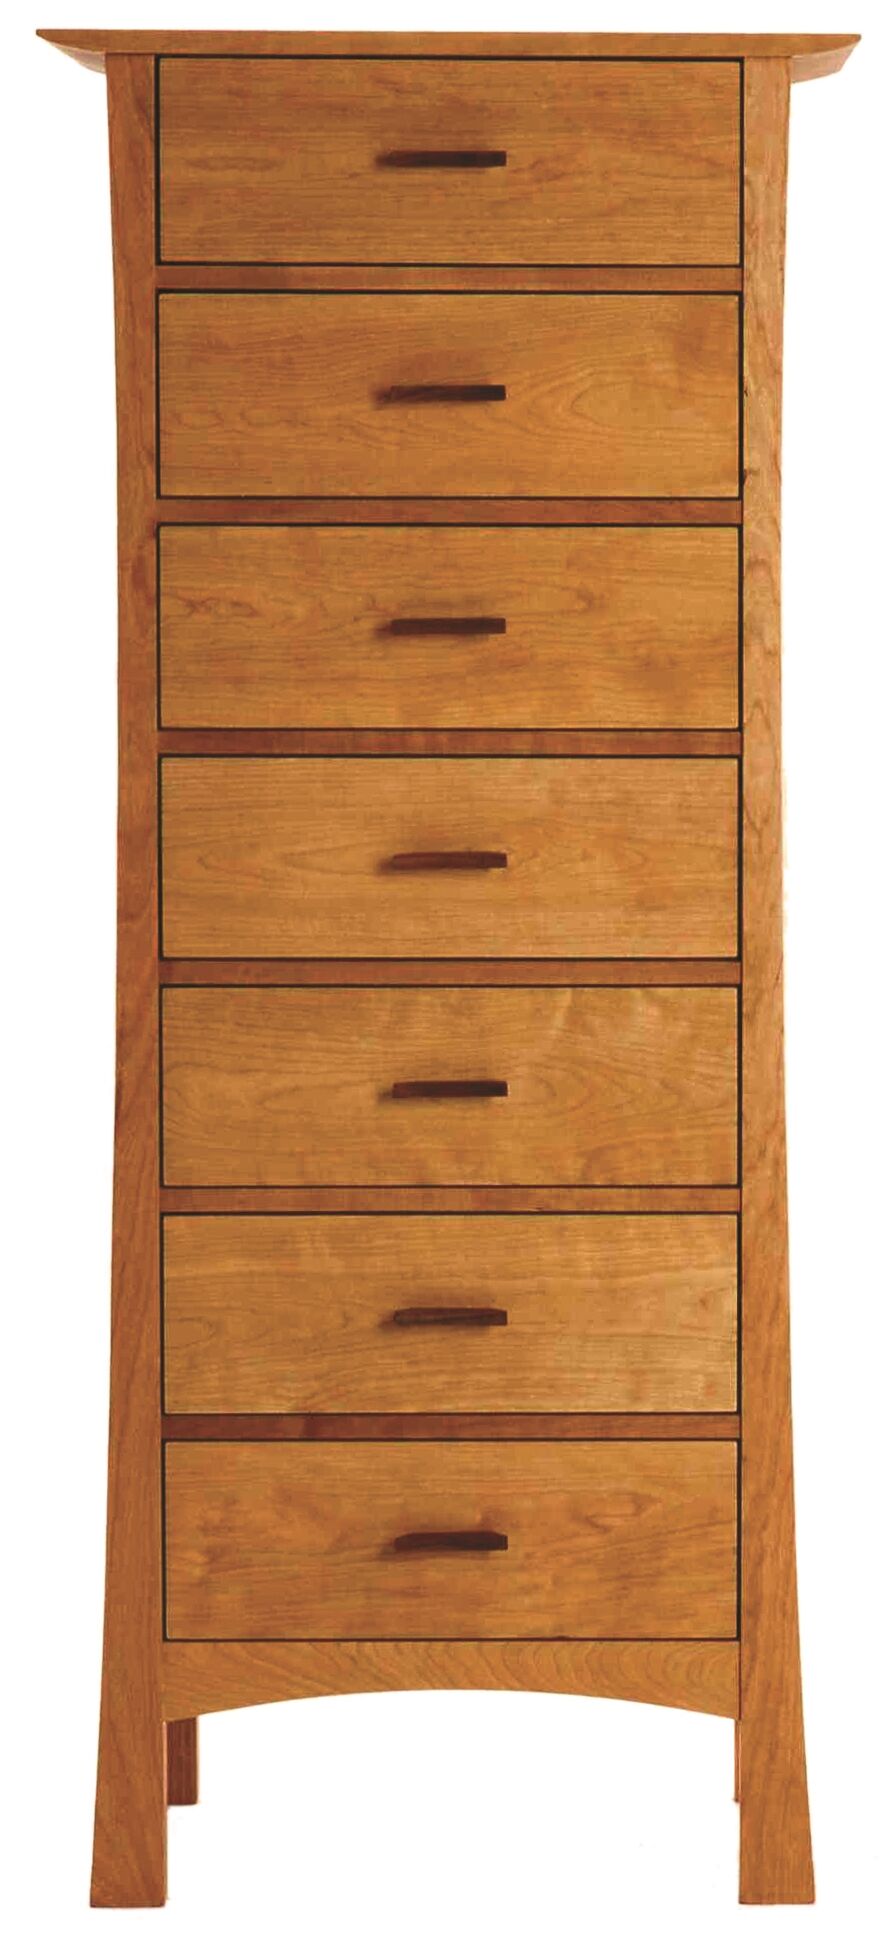 Skyline Wood 7-Drawer Lingerie Chest by Vermont Furniture Designs